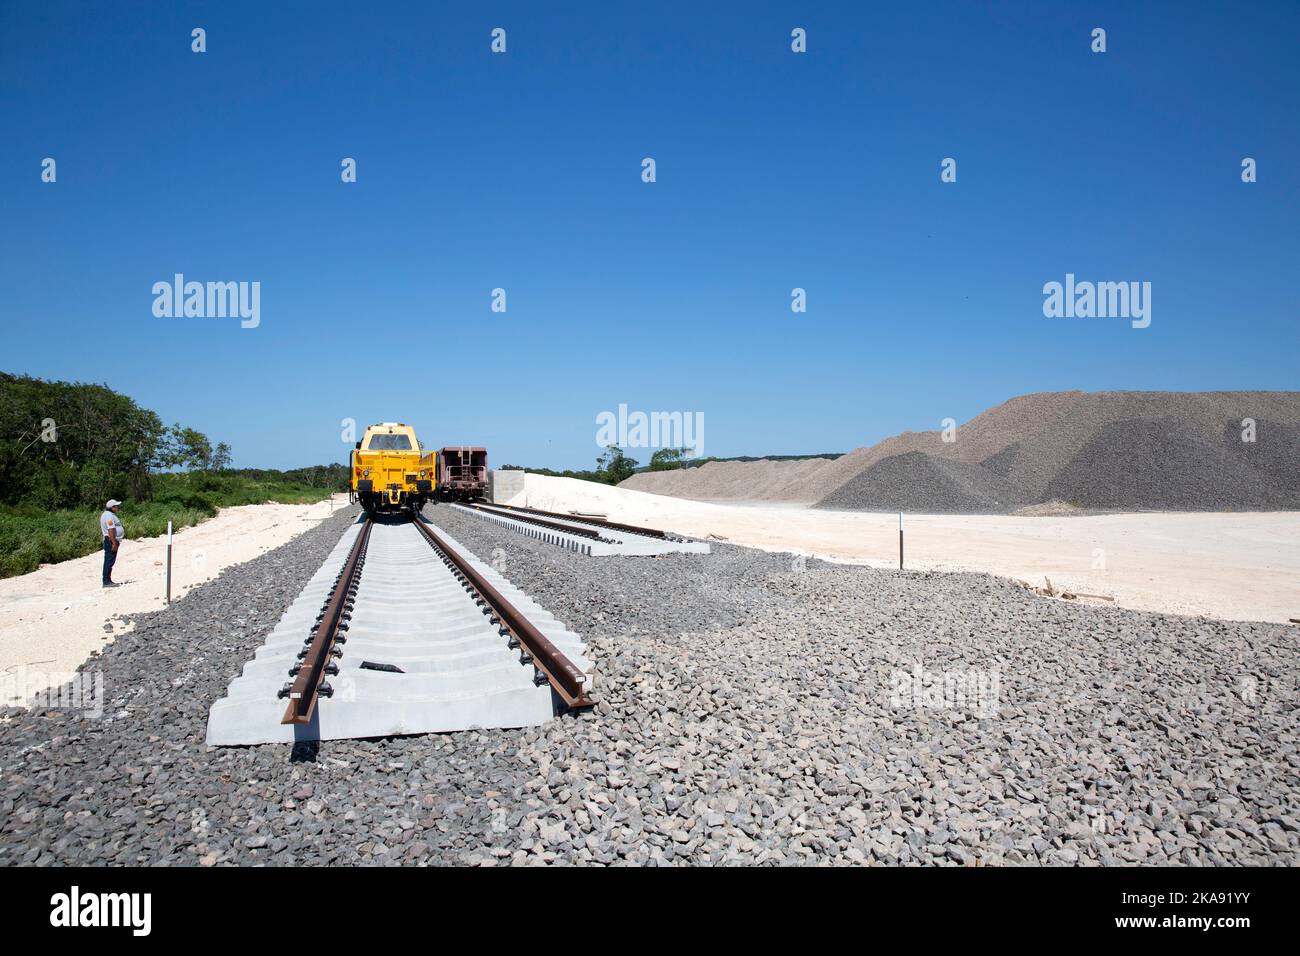 Construction of section 2 (Escárcega-Calkiní Section) of the Mayan Train project between Pomuch and Tenabo, Campeche state, Mexico on October 23, 2022. The route covers 235 km, going from Escárcega to Calkiní in the state of Campeche. The Maya Train project is one of Mexican President Andrés Manuel López Obrador’s flagship development projects. Its 1,525-km route will run through five states (Tabasco, Chiapas, Campeche, Yucatán and Quintana Roo states), linking Maya temples like Palenque, Chichen Itzá and Calakmul, the colonial city of Mérida, beach resorts of Cancún, Playa del Carmen and Tulu Stock Photo